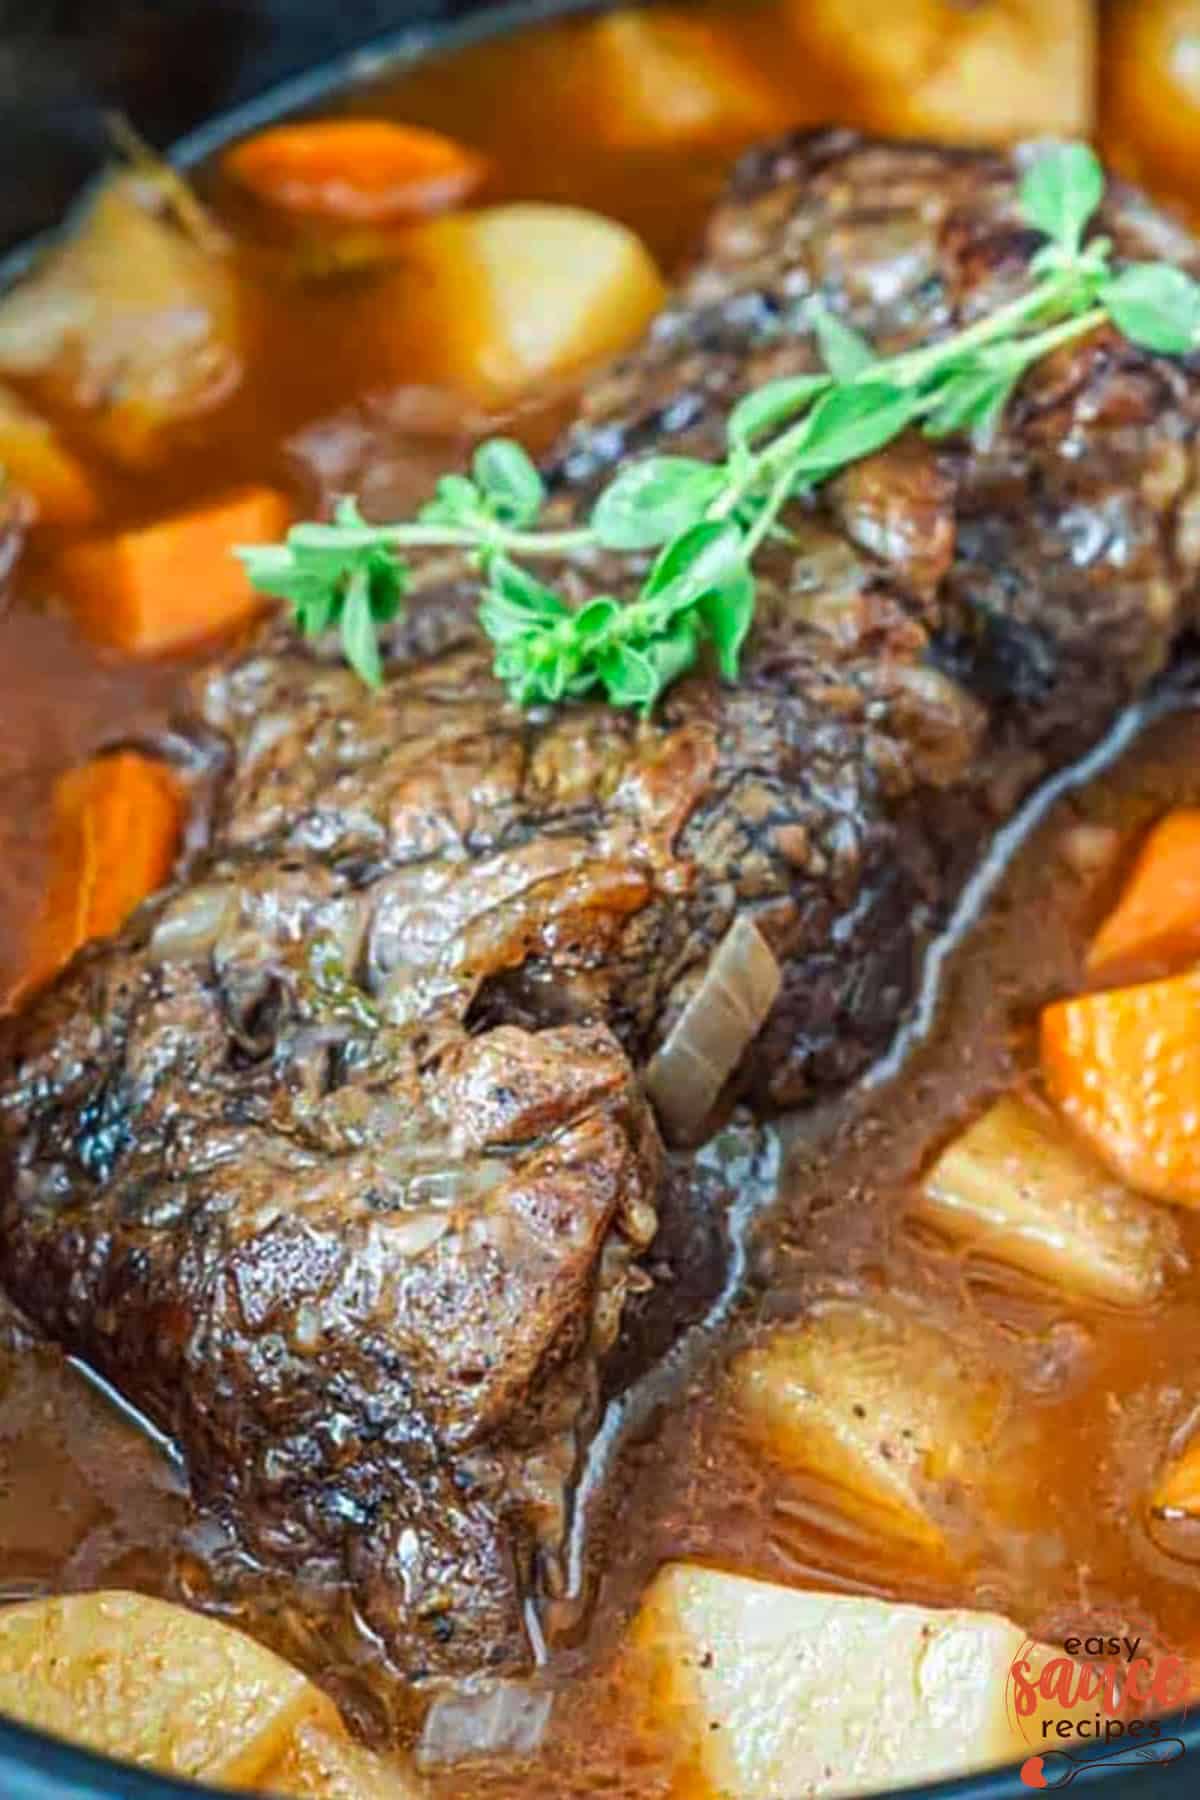 a pot roast in a slow cooker with carrots, potatoes, juices and herbs